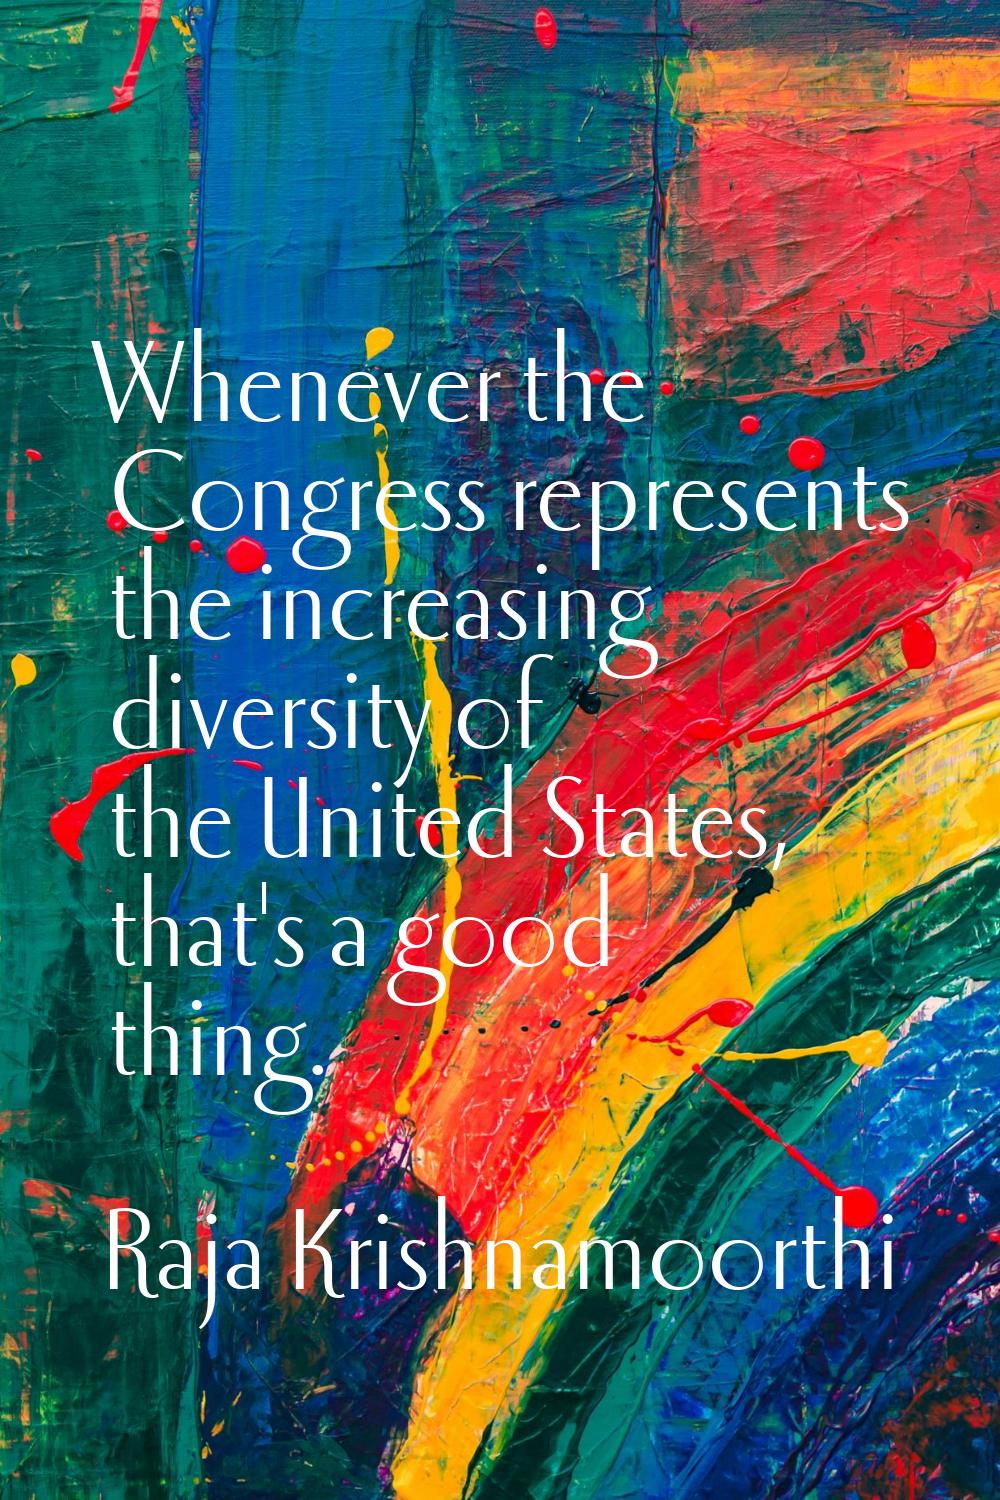 Whenever the Congress represents the increasing diversity of the United States, that's a good thing